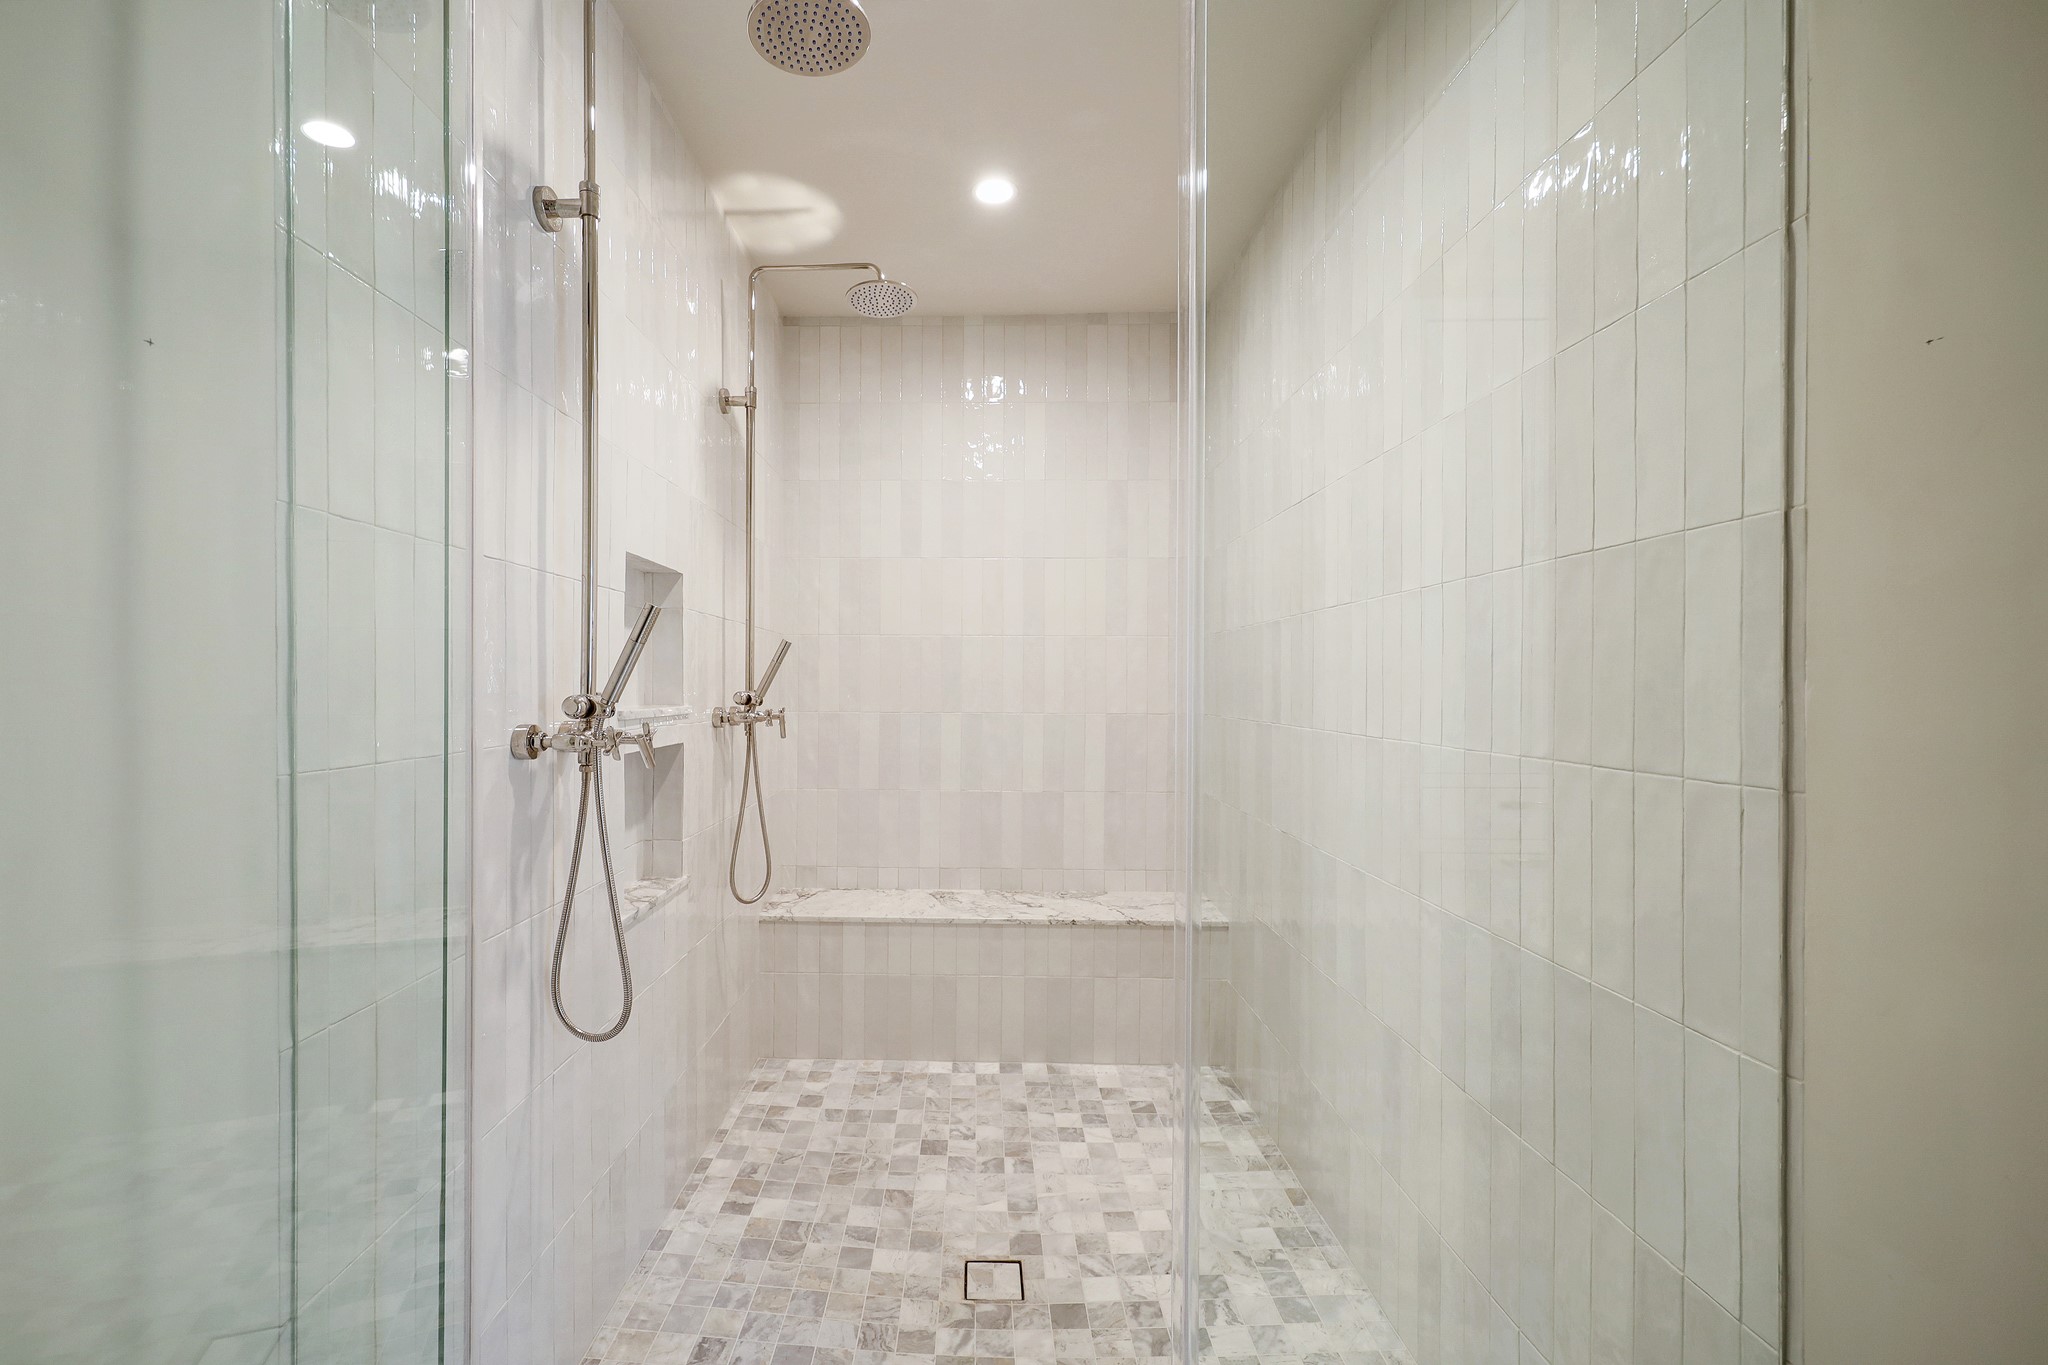 Spacious walk-in shower with curb-less entry, framless glass door, floor to ceiling Ceramic Zellige look tile, two rain shower heads and bench seat. Every detail is well thought out.